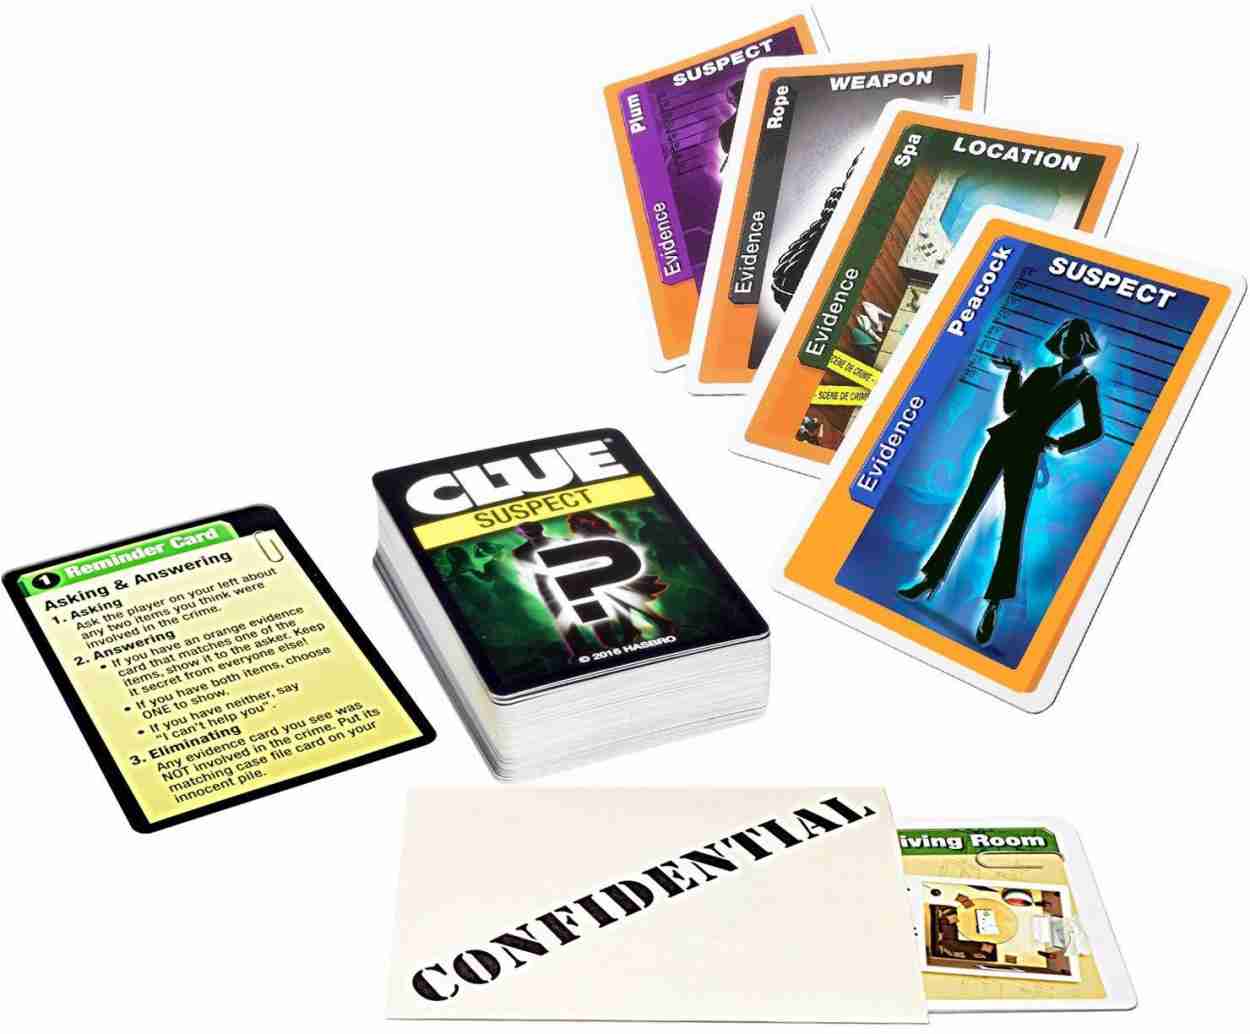 monopoly plastic Cluedo Suspect Card Game for Kids - Fun of Guess Who Clue in Minutes, Detective Cluedo Board Game for Family Friends, Best Party Card Game